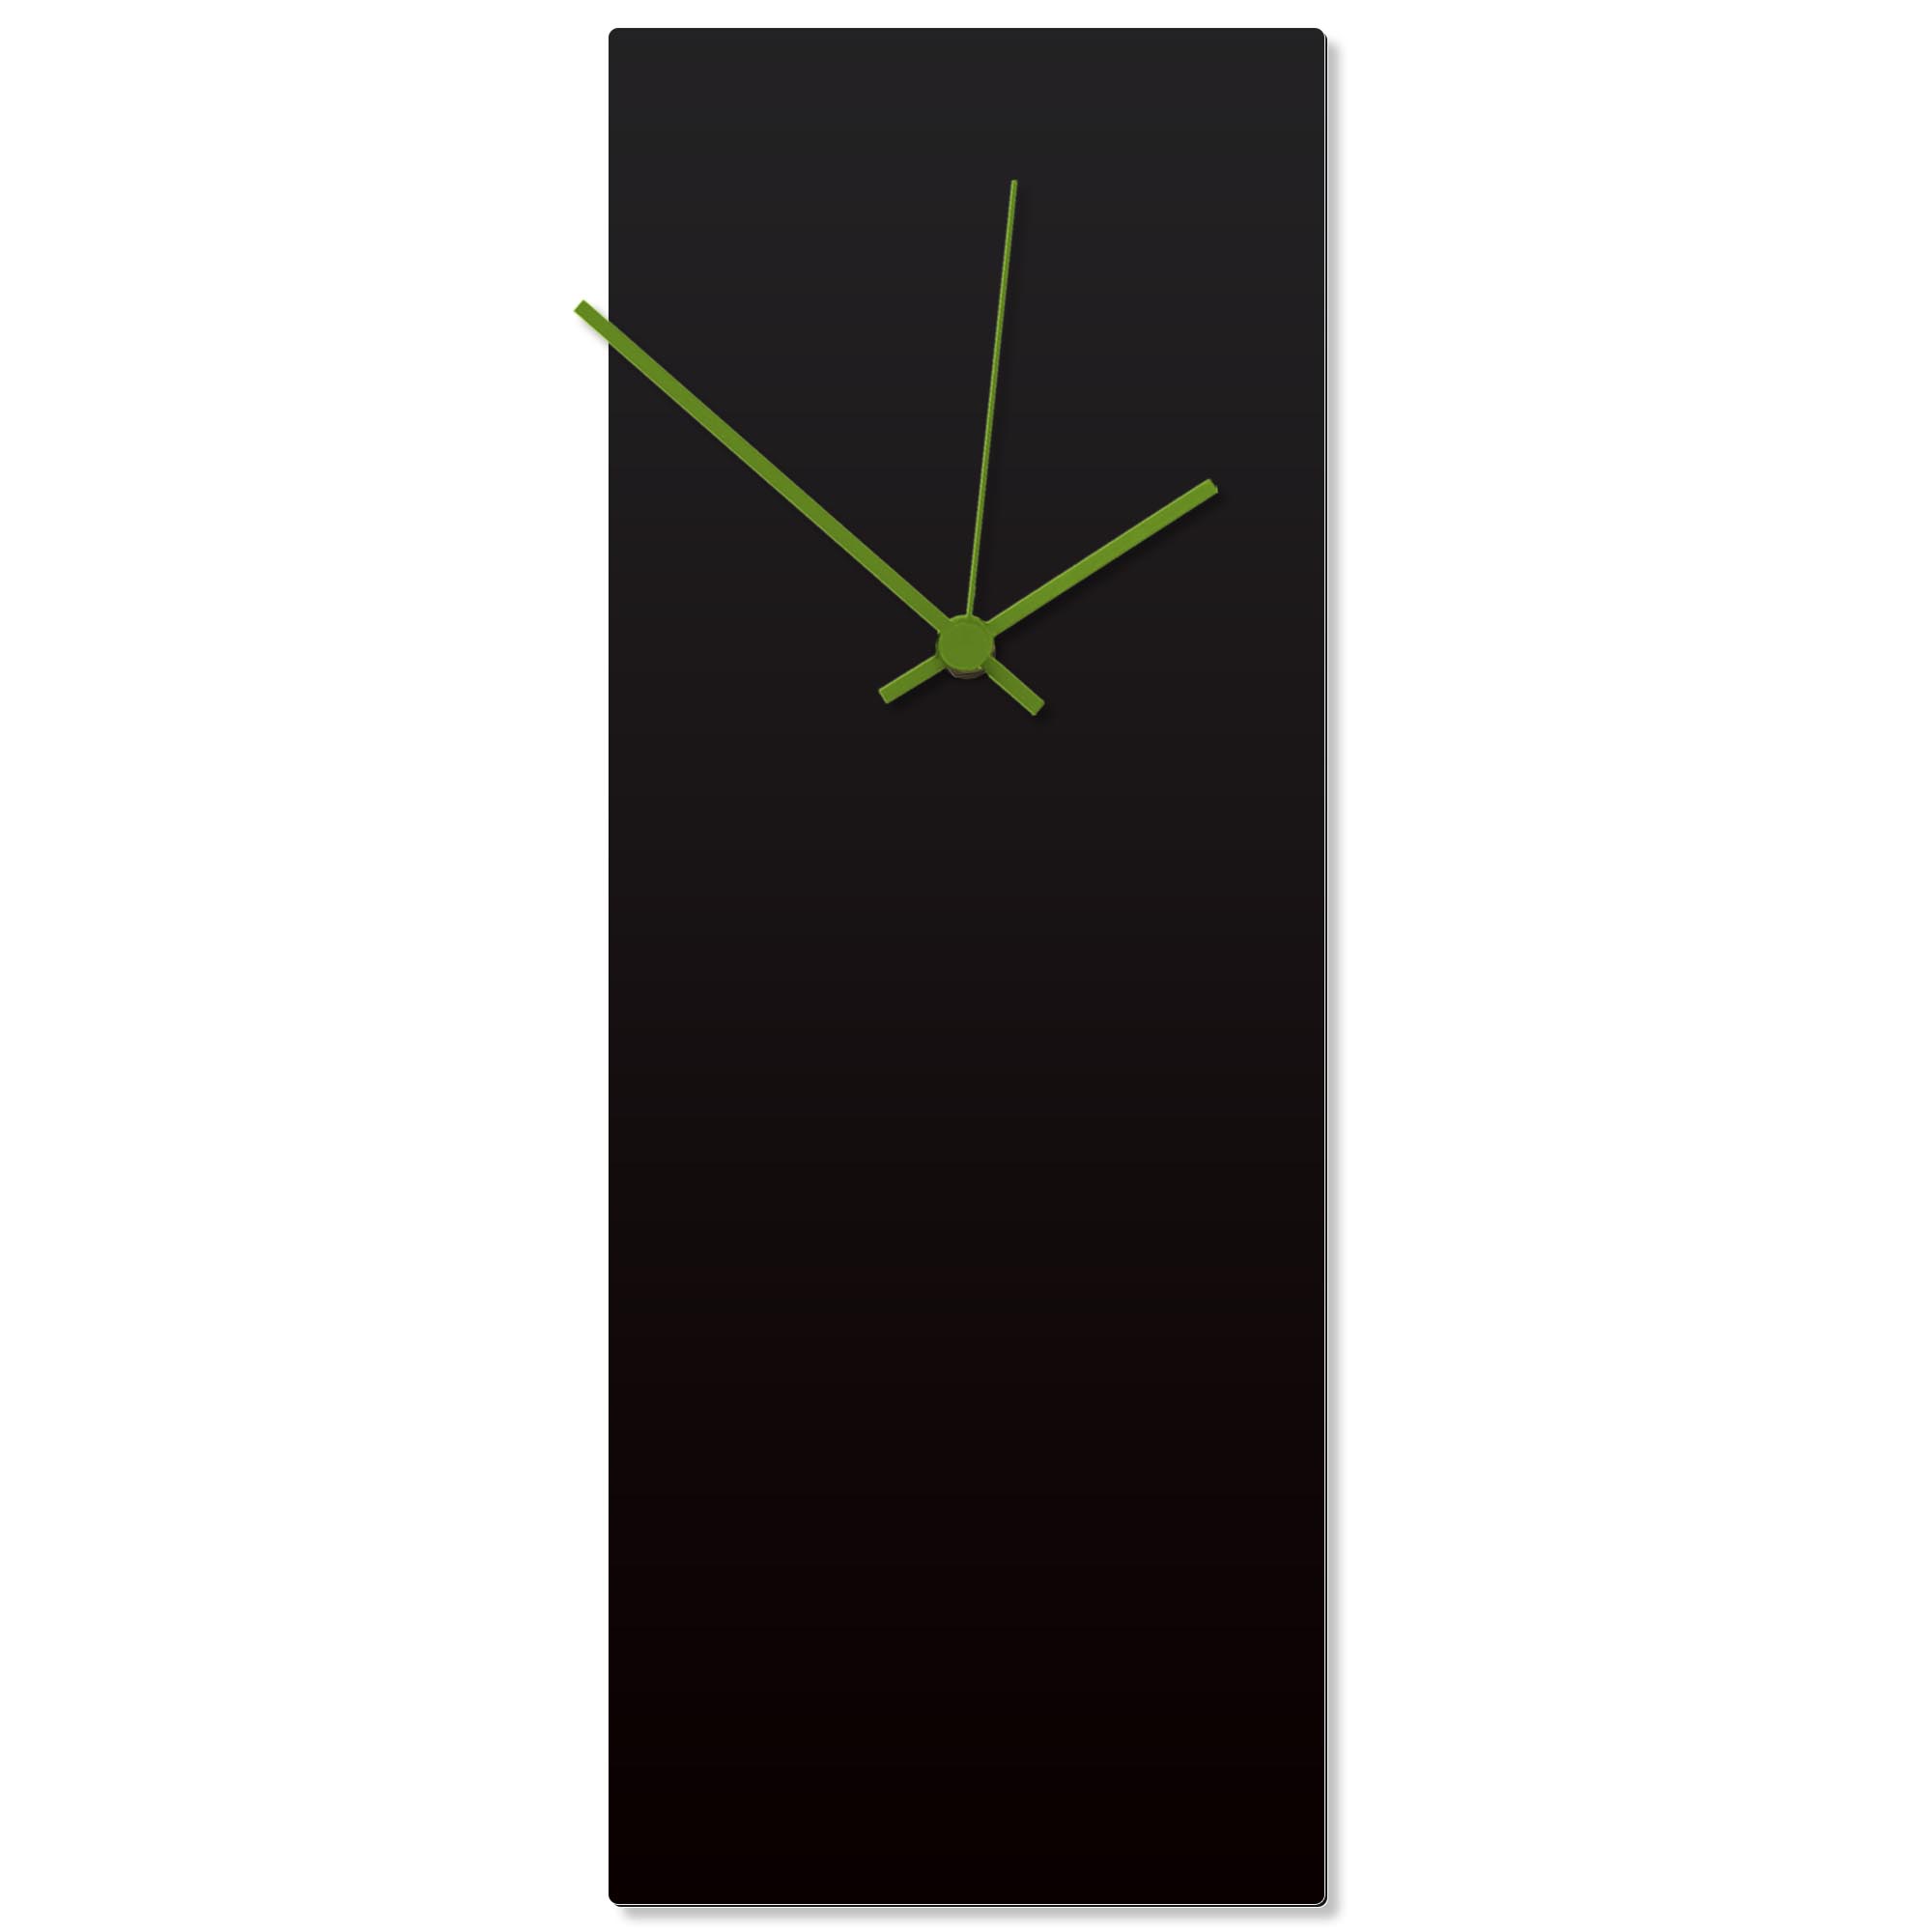 Blackout Green Clock Large 8.25x22in. Aluminum Polymetal